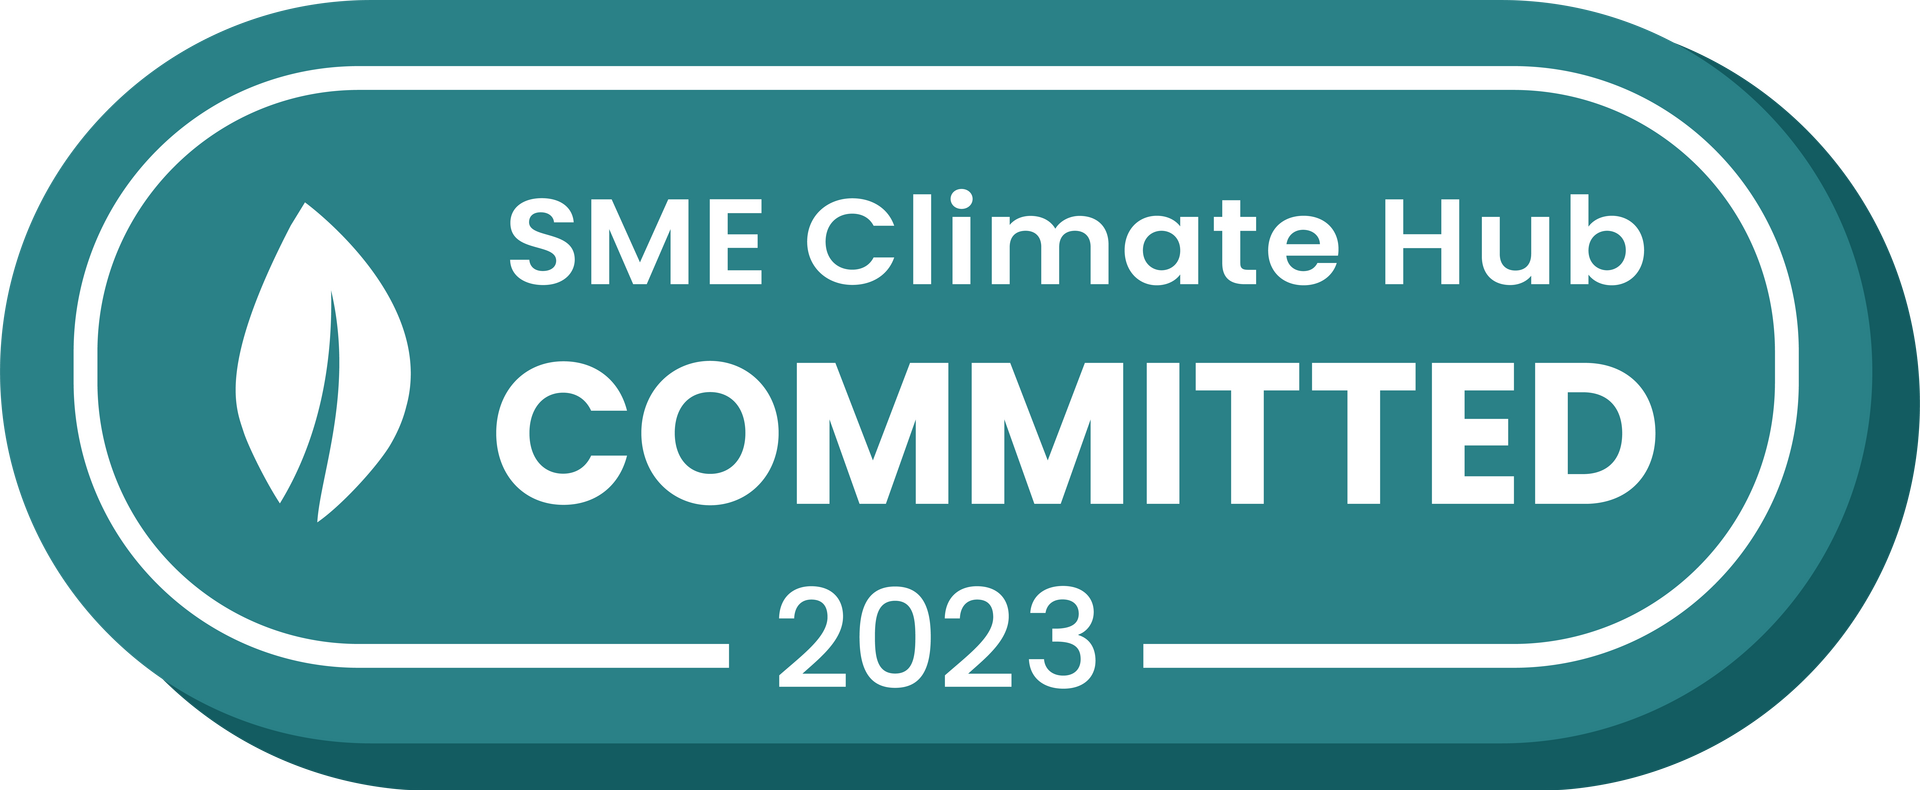 2023 SME Committed Badge 1